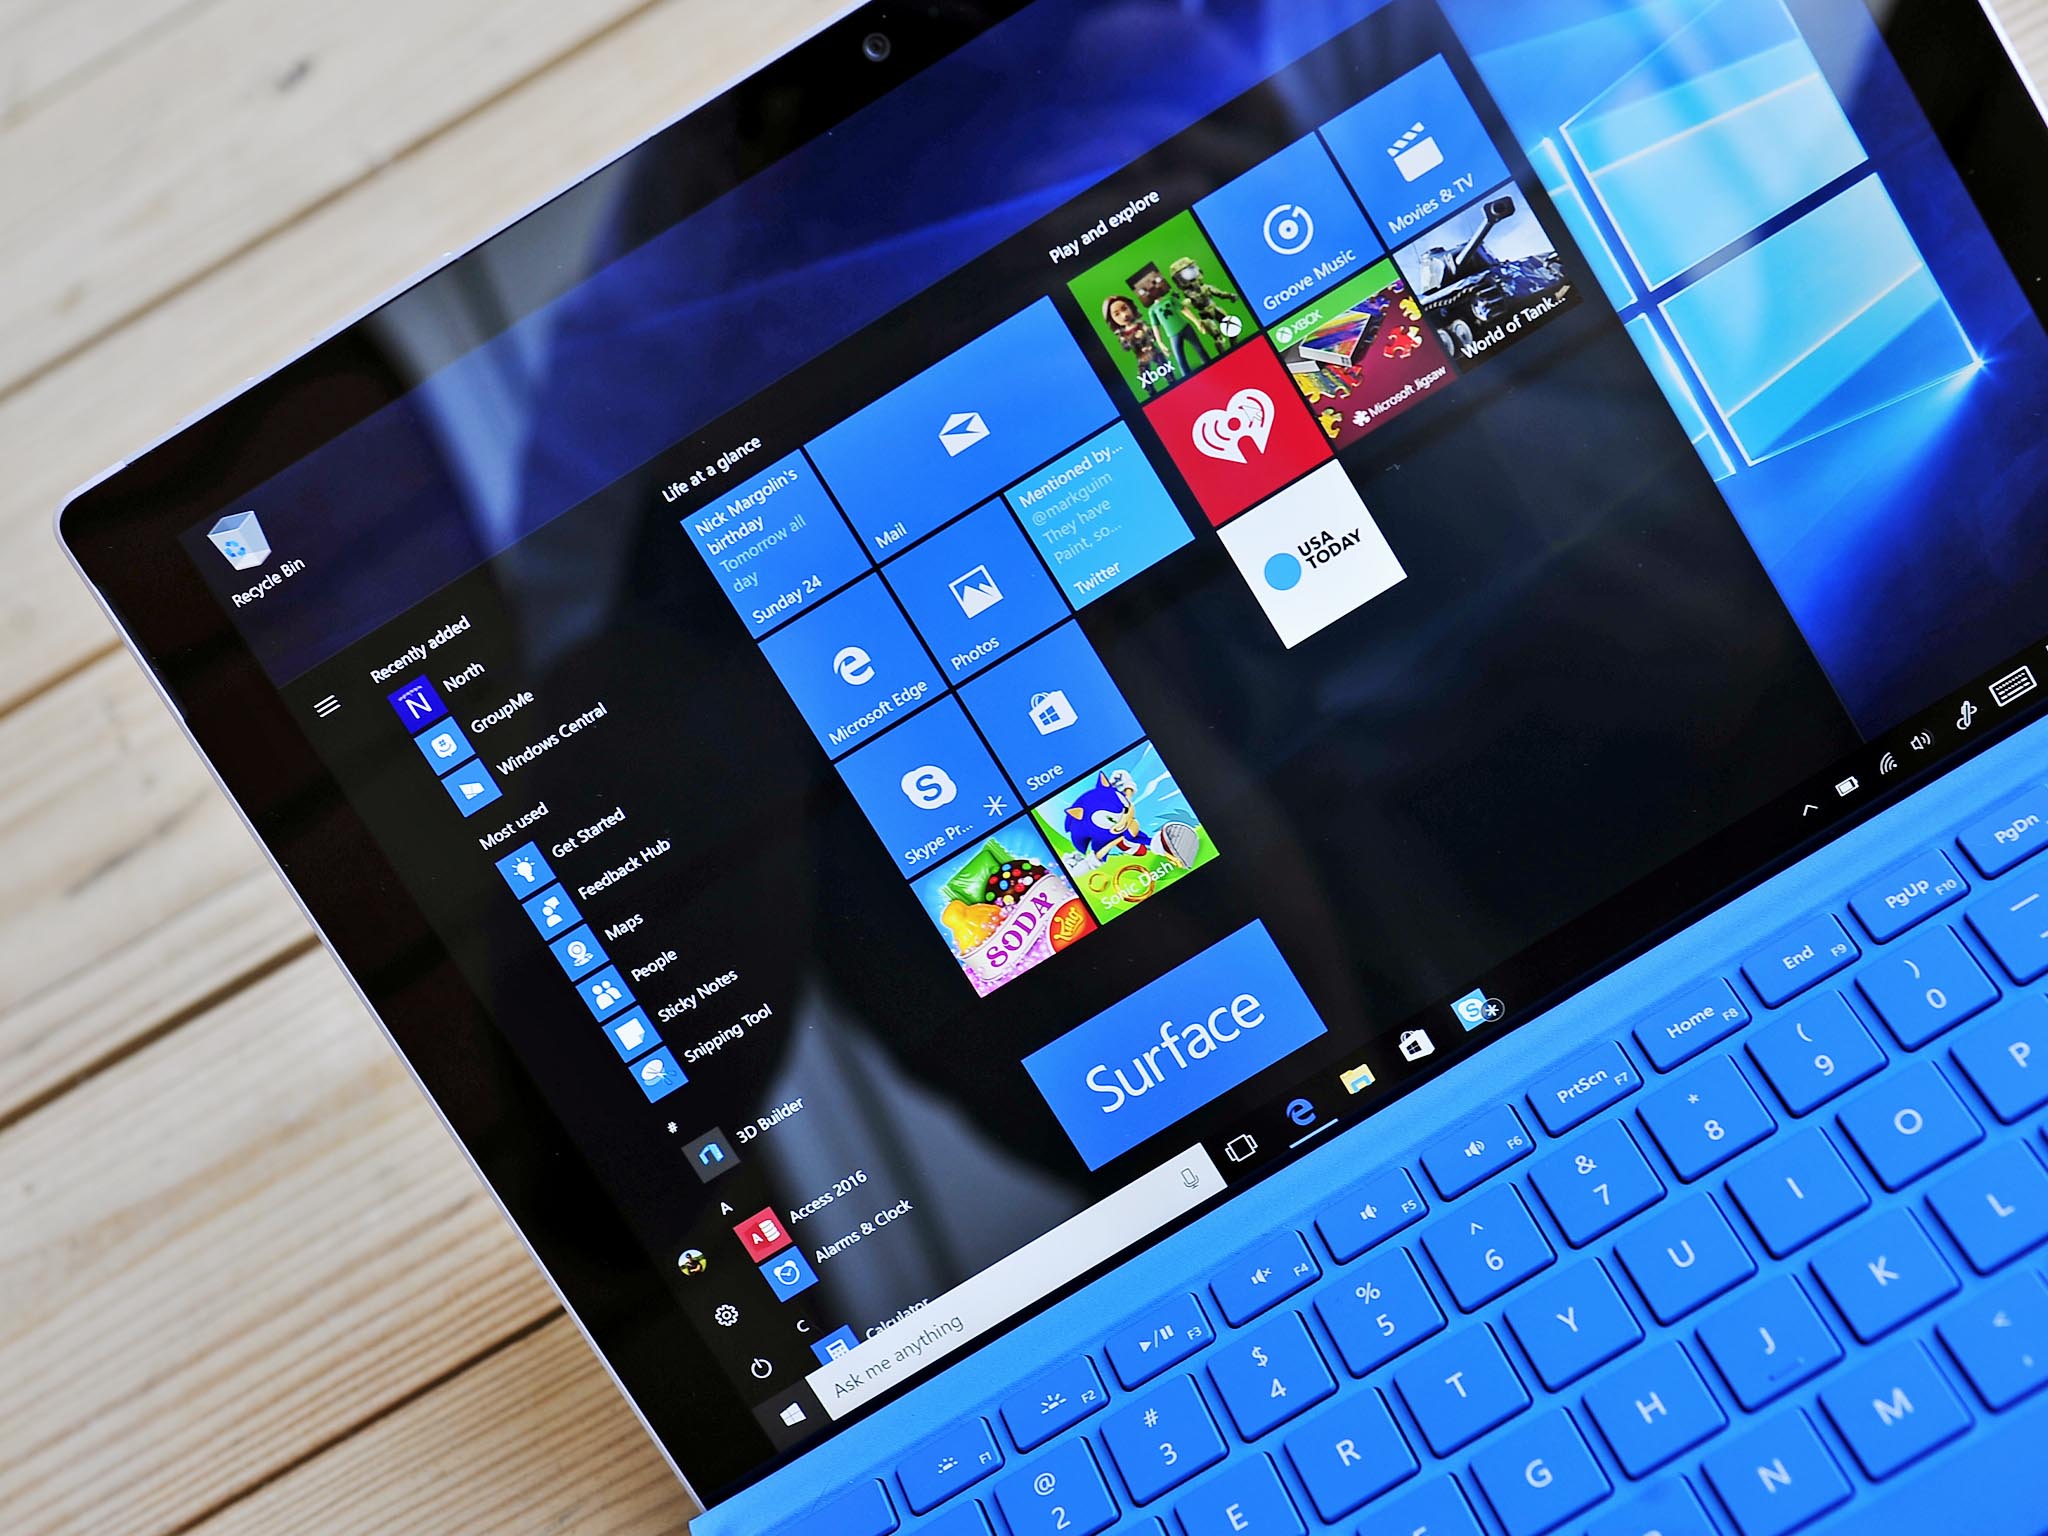 Support for recent Windows 10 versions extended for enterprise, education users